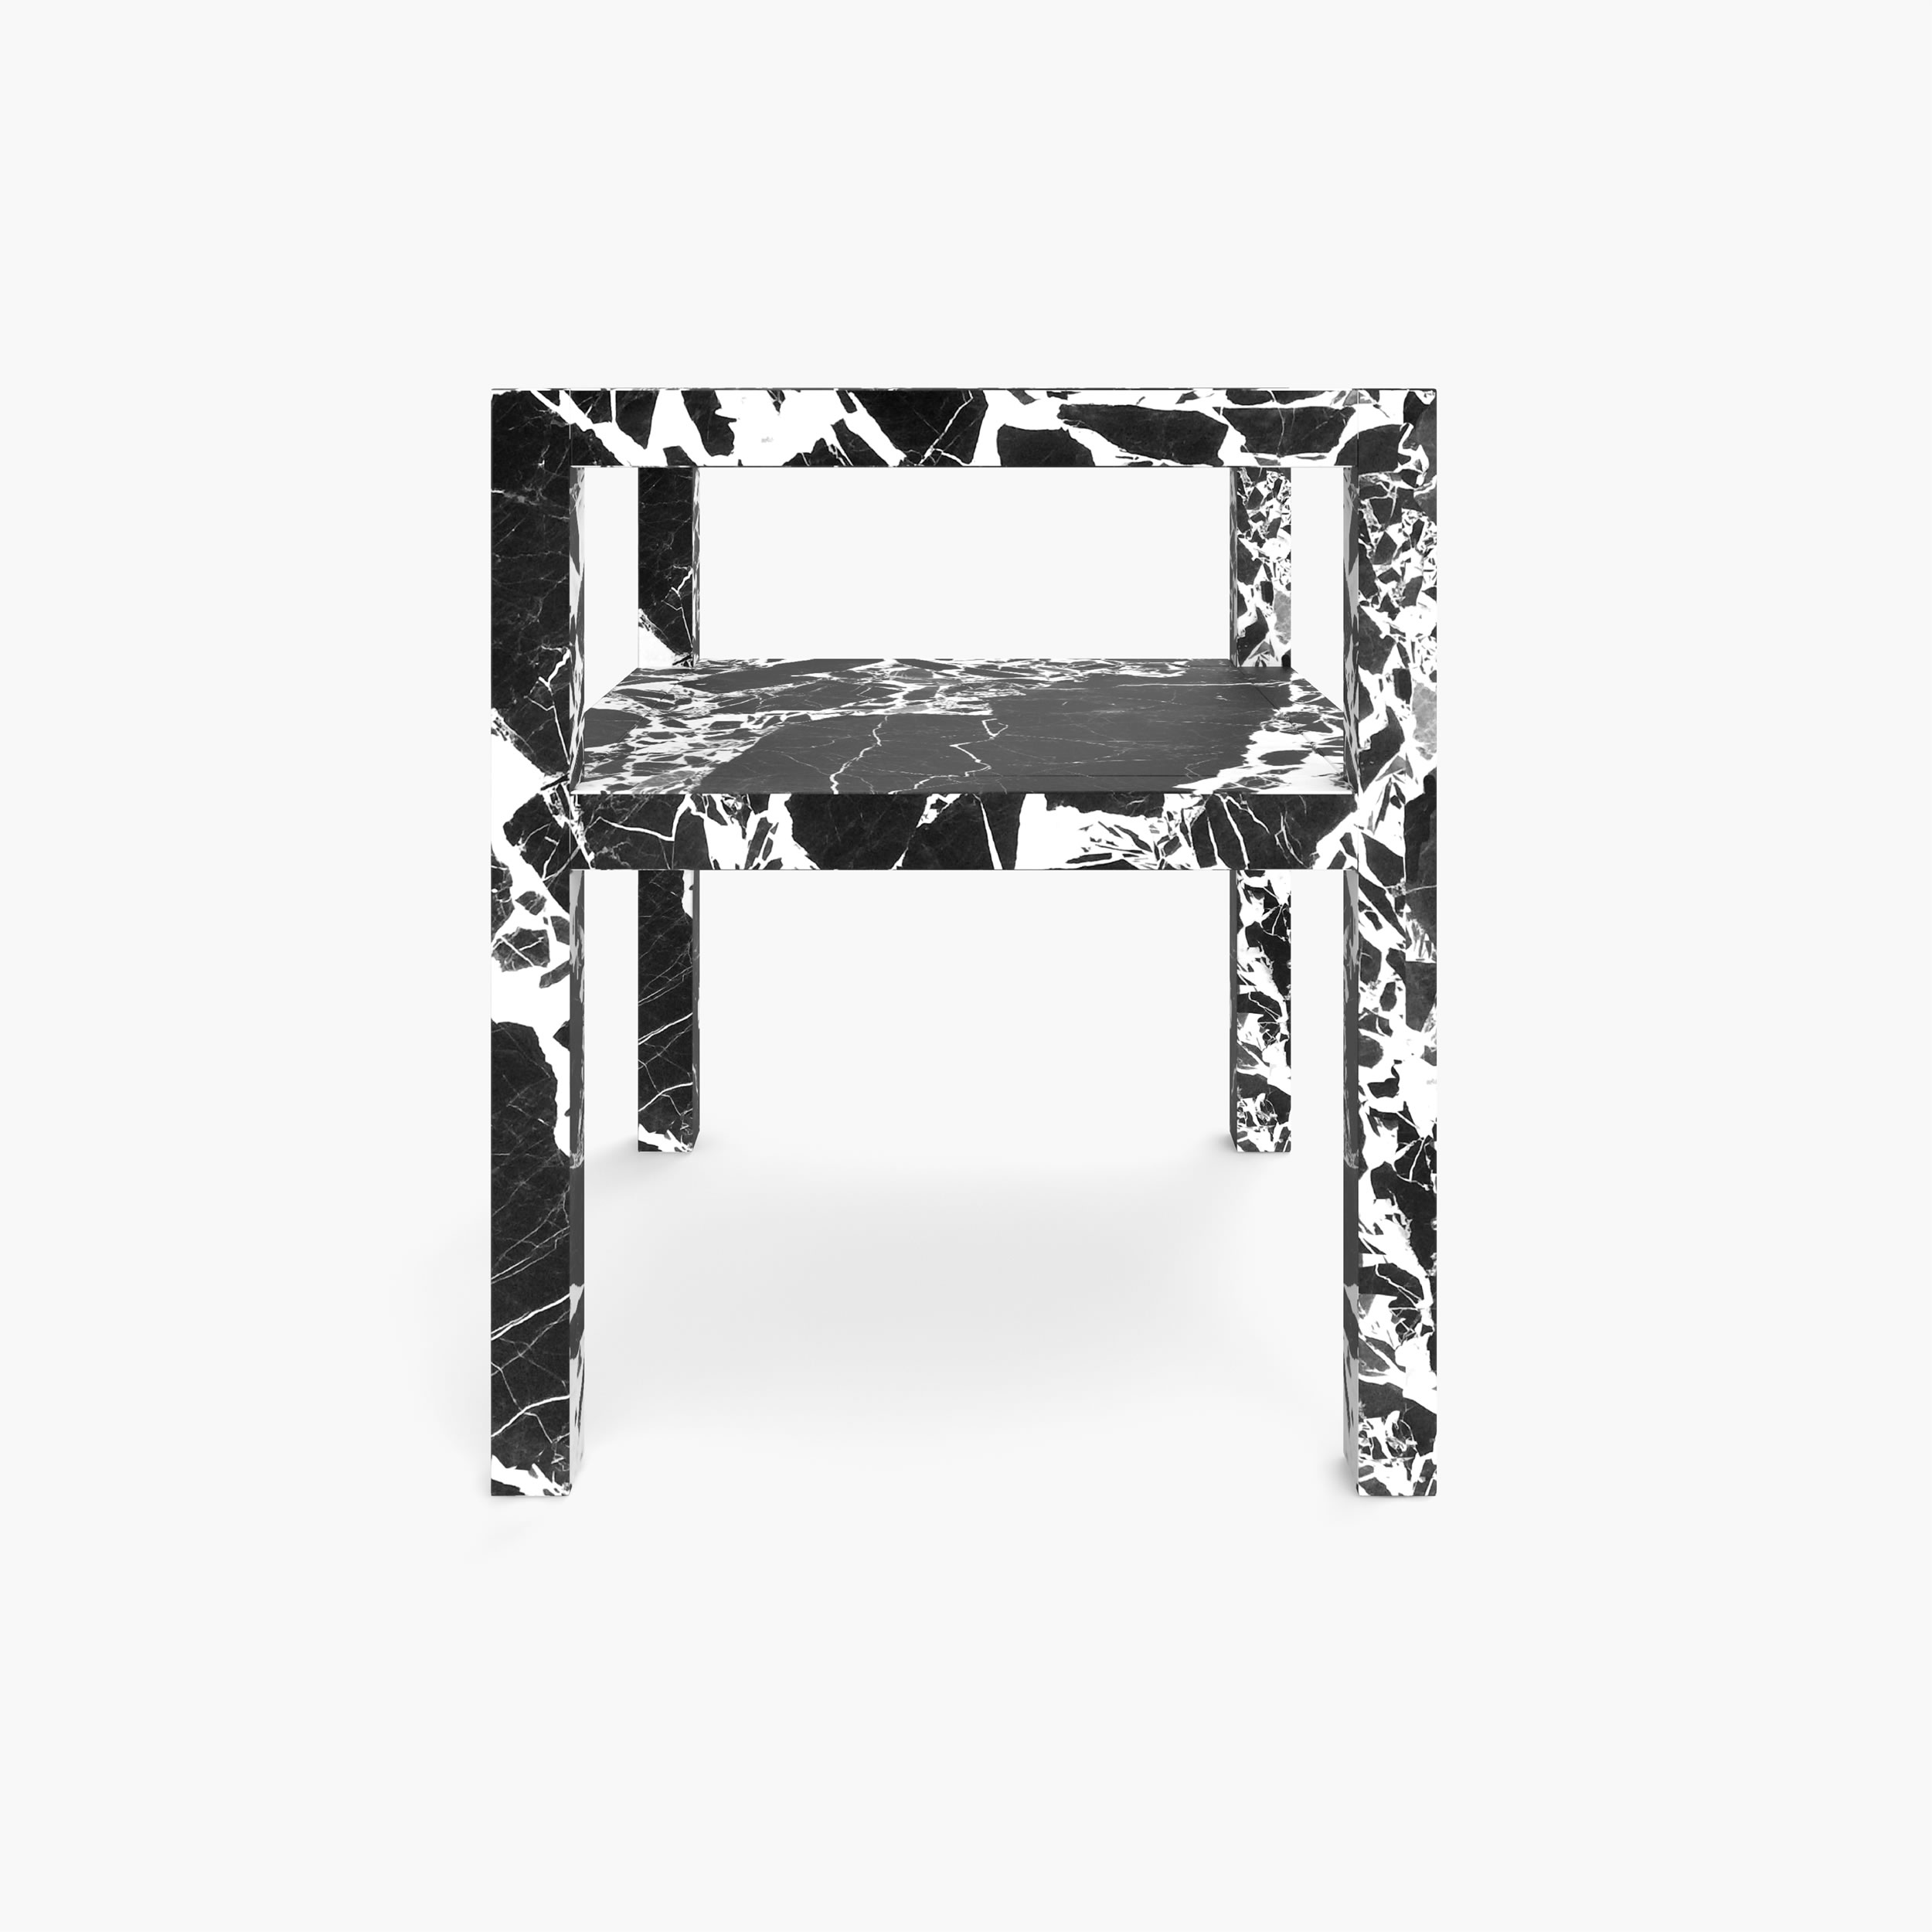 Armchair of square bars White Grand Antique Marble hand crafted Dining Room creation Chairs FS 424 FELIX SCHWAKE